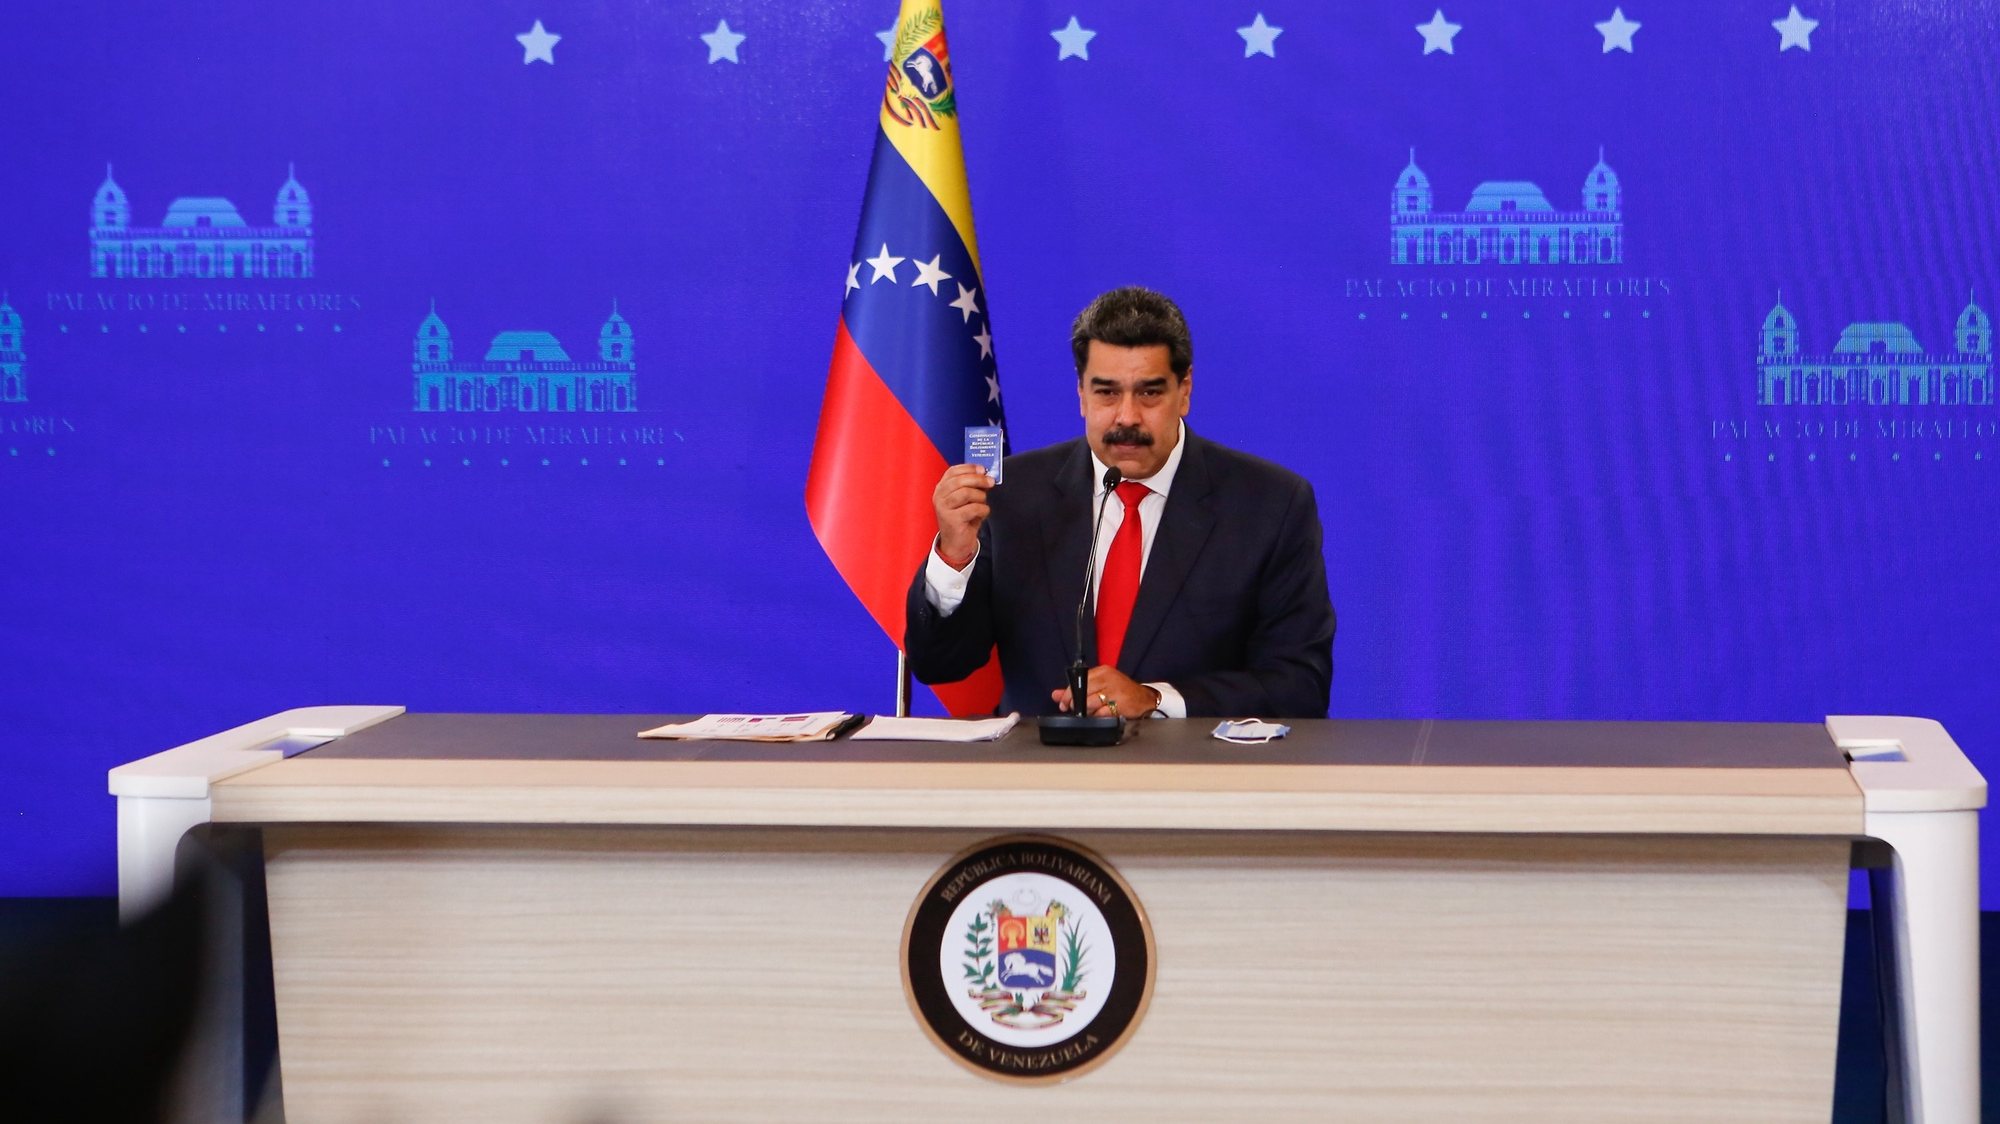 epa08871081 A handout photo made available by Prensa Miraflores shows President of Venezuela, Nicolas Maduro, adressing a press conference in Caracas, Venezuela, 08 December 2020. Maduro expressed his hope to open channels of dialogue with the United States Government when Joe Biden, president-elect, will take office on January 20 to replace Donald Trump, who does not recognize the Venezuelan Executive.  EPA/MIRAFLORES PRESS HANDOUT  HANDOUT EDITORIAL USE ONLY/NO SALES